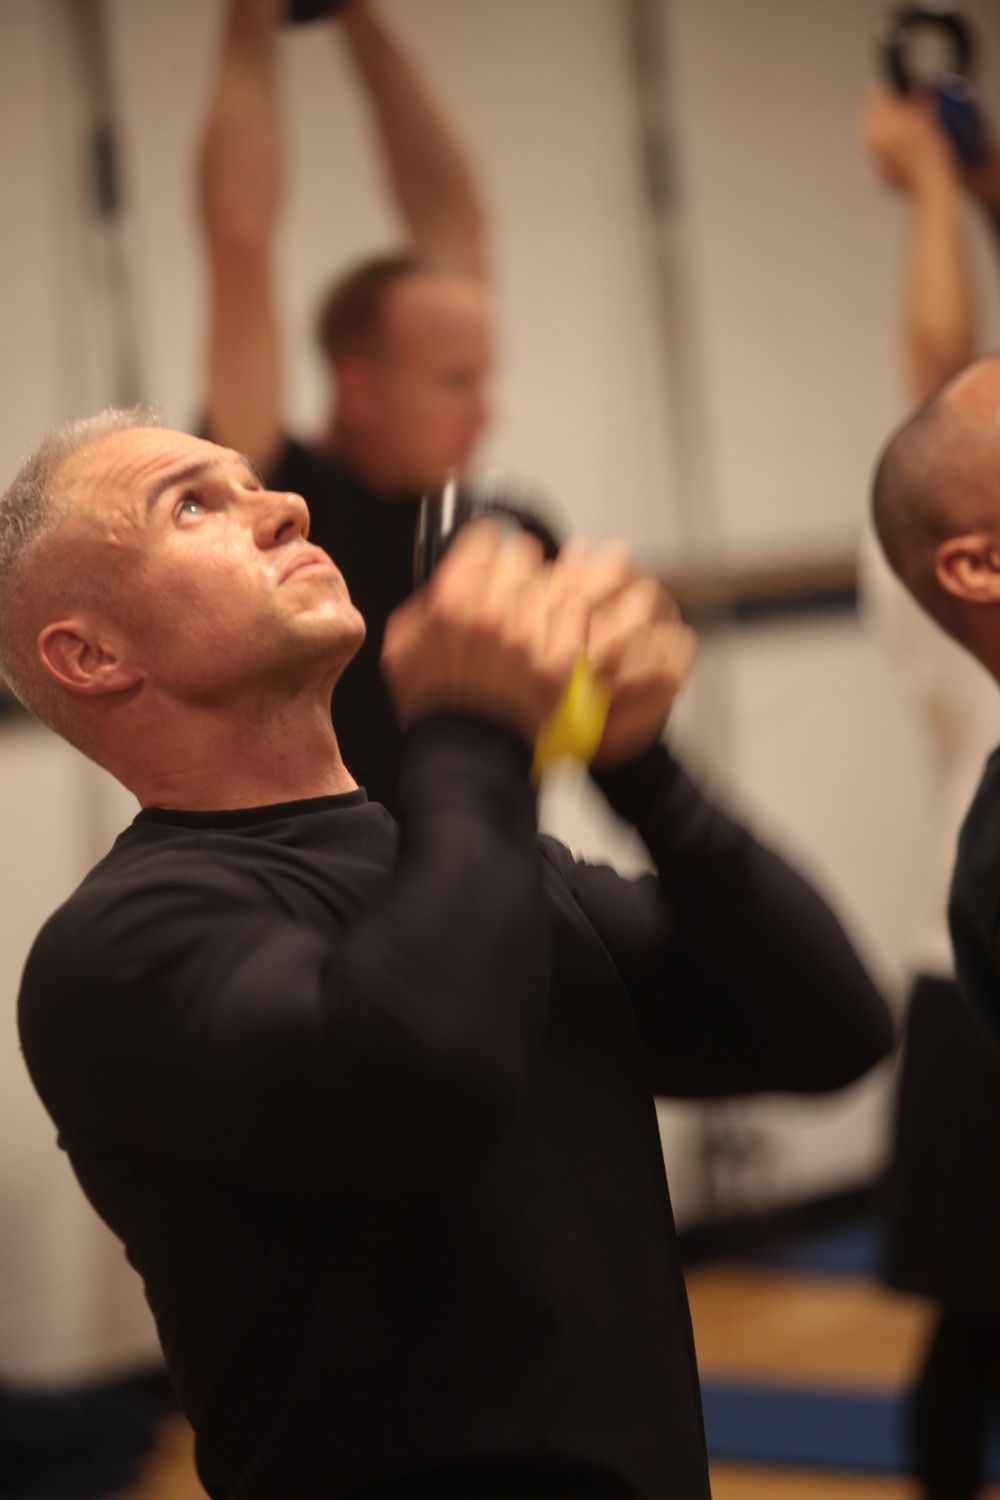 Combat Fitness Workshop offer variety to service members' workouts